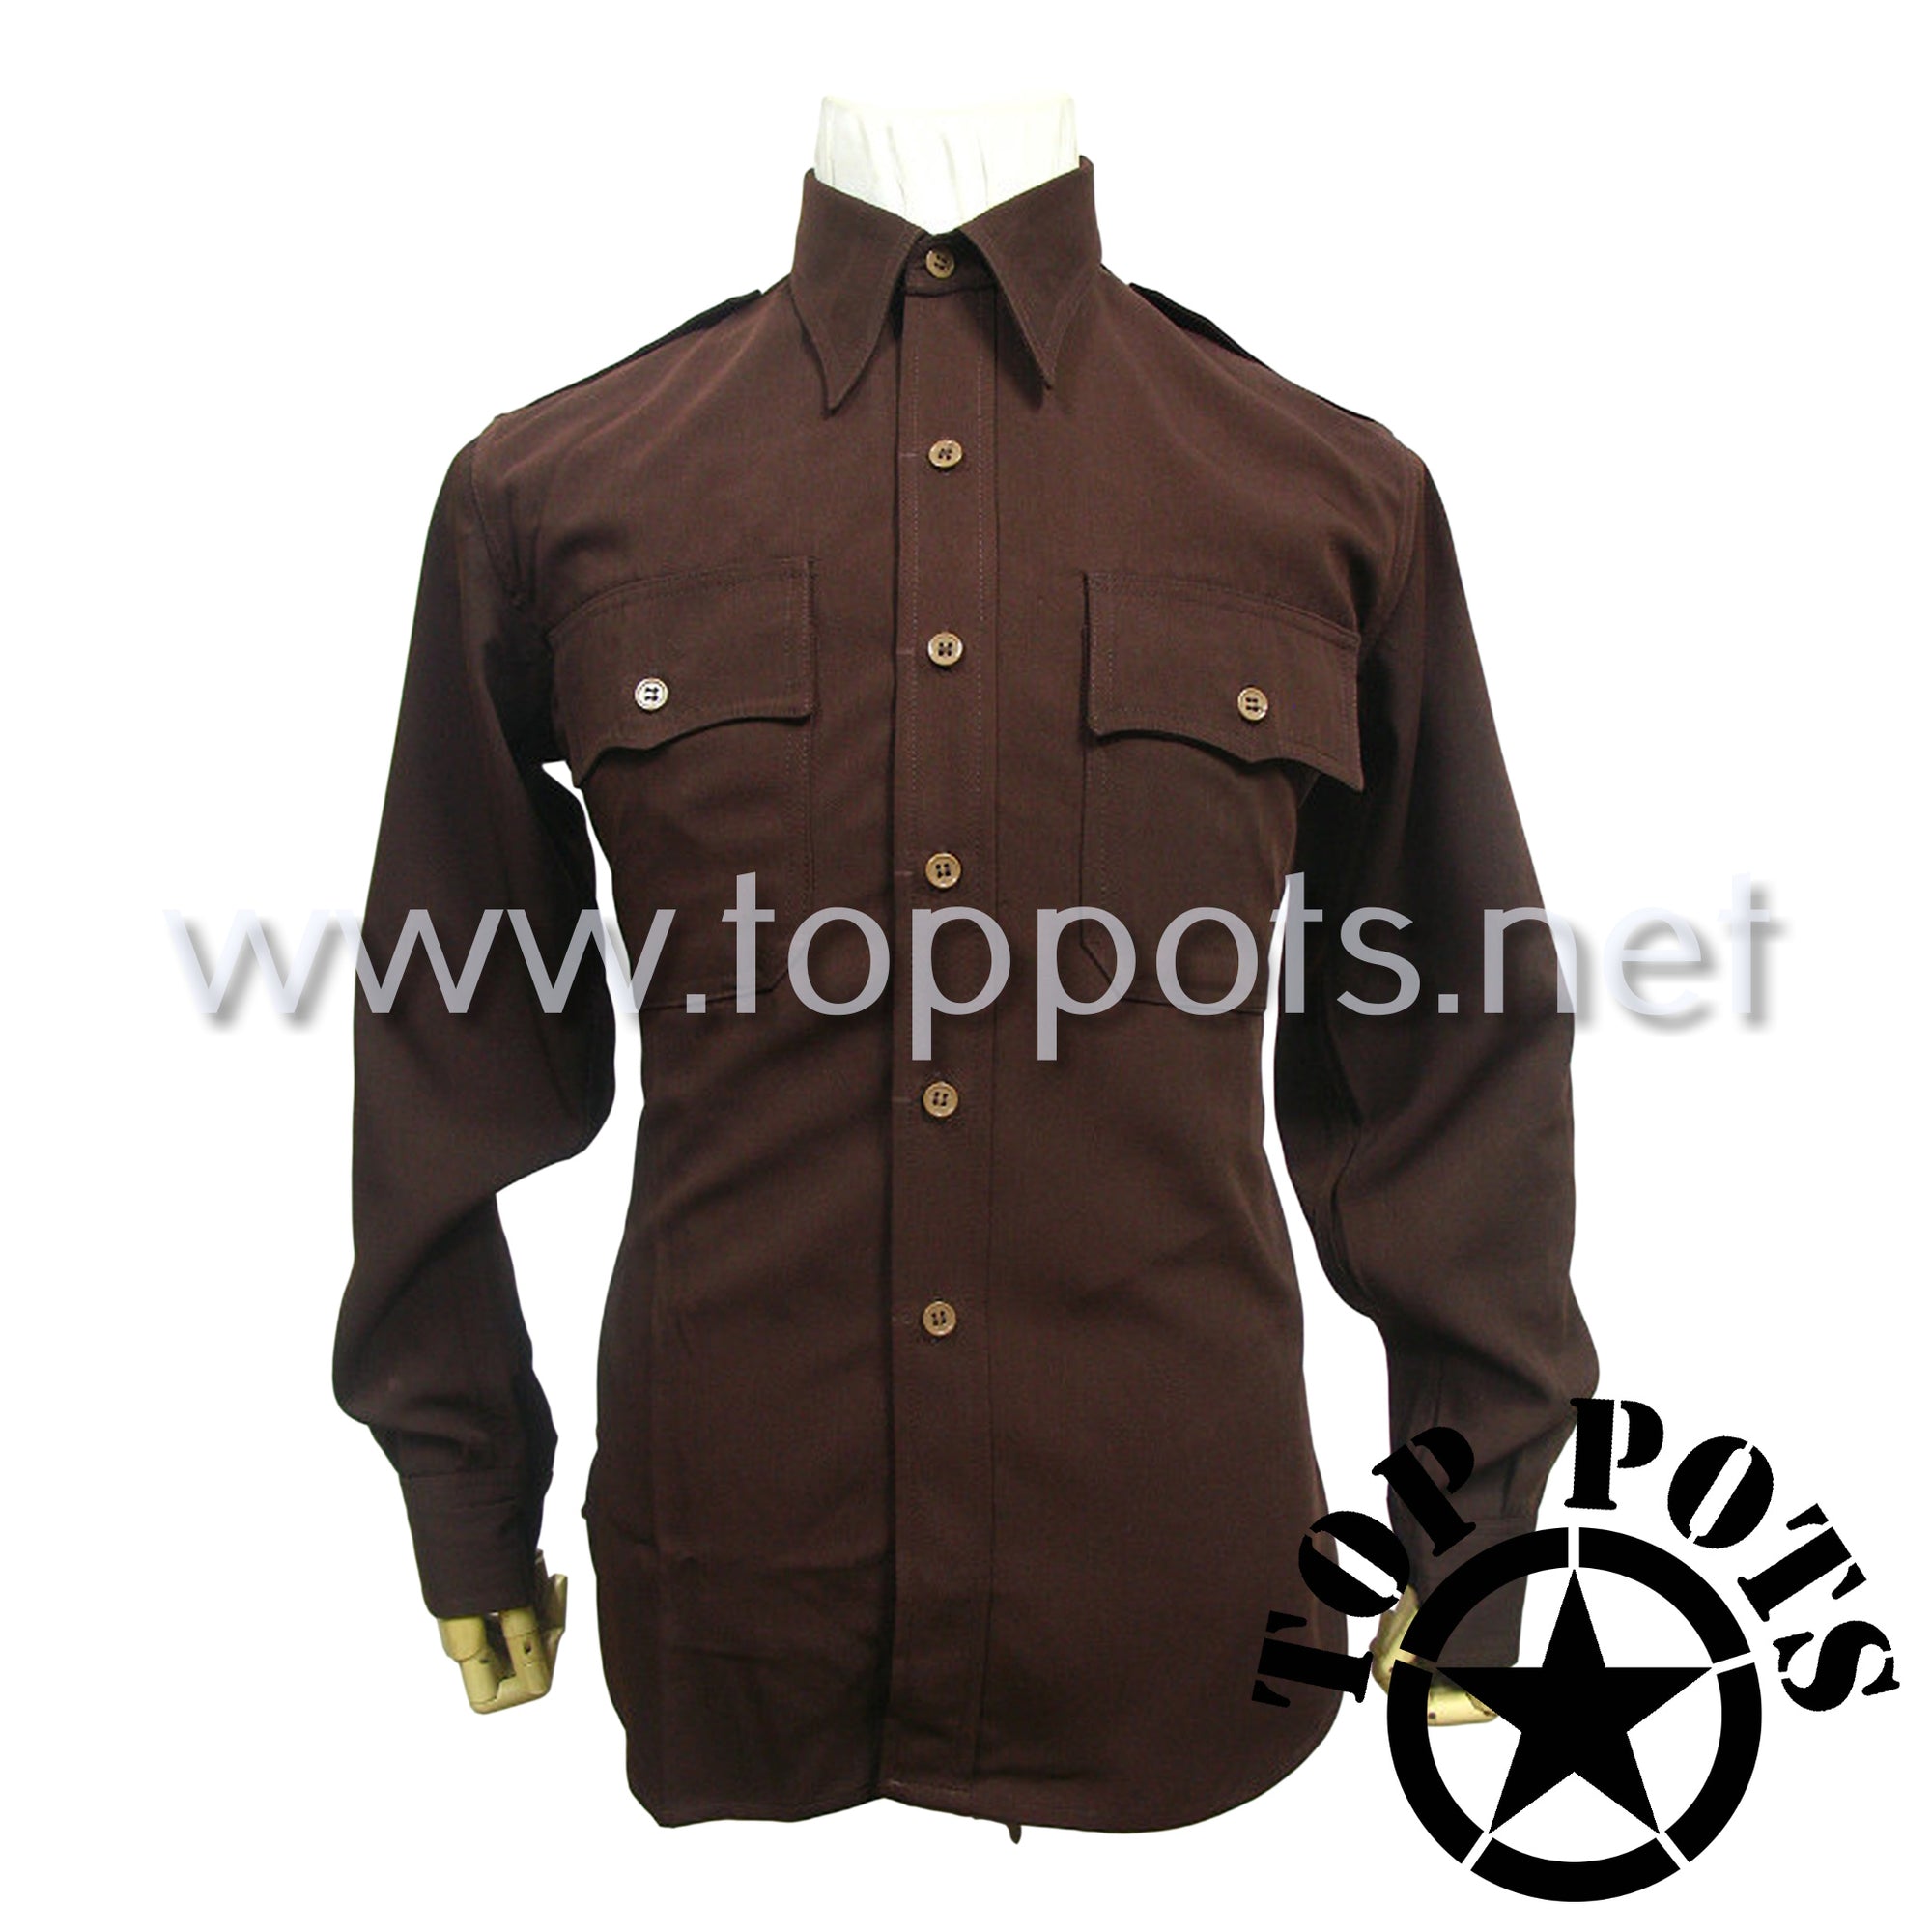 Featured Uniform - Reproduction WWII US Army Uniform Officer Service Shirt - Chocolate (Shirt Only)